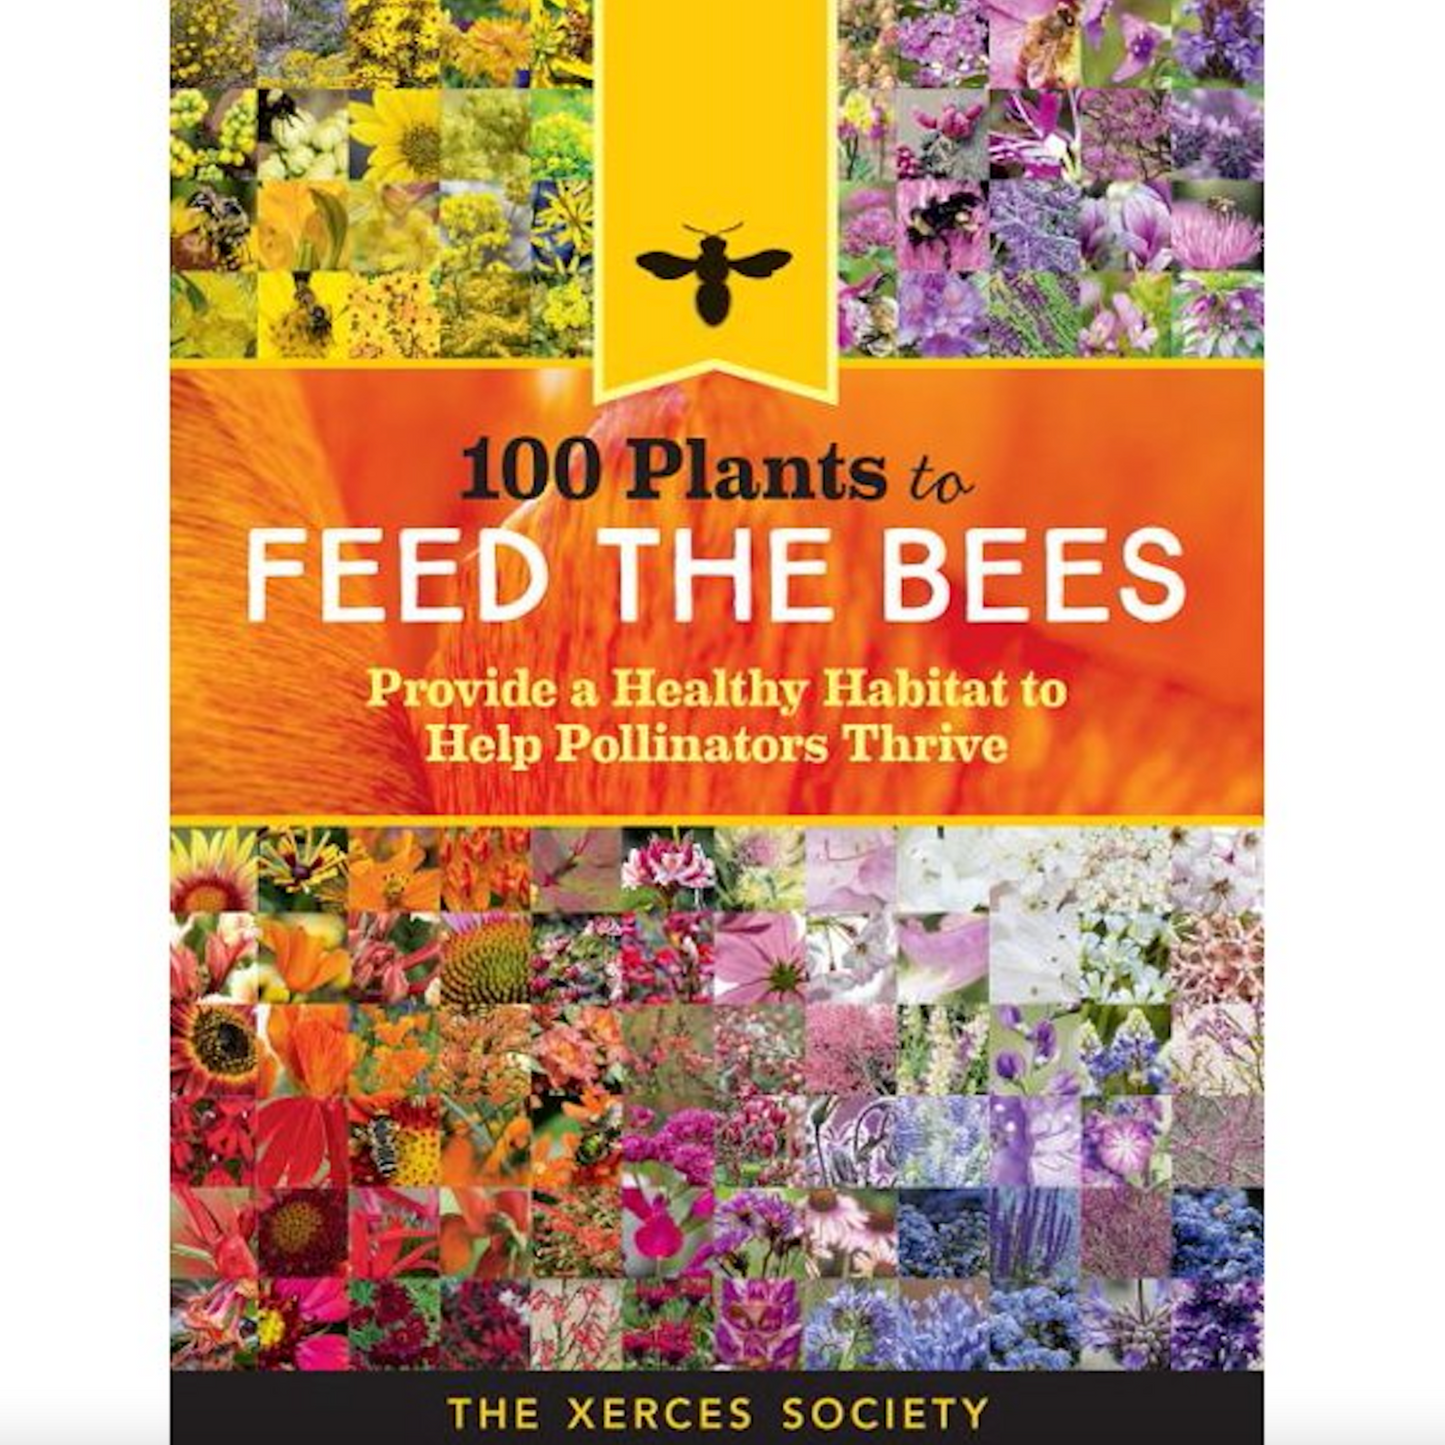 100 Plants to Feed the Bees - The Xerces Society